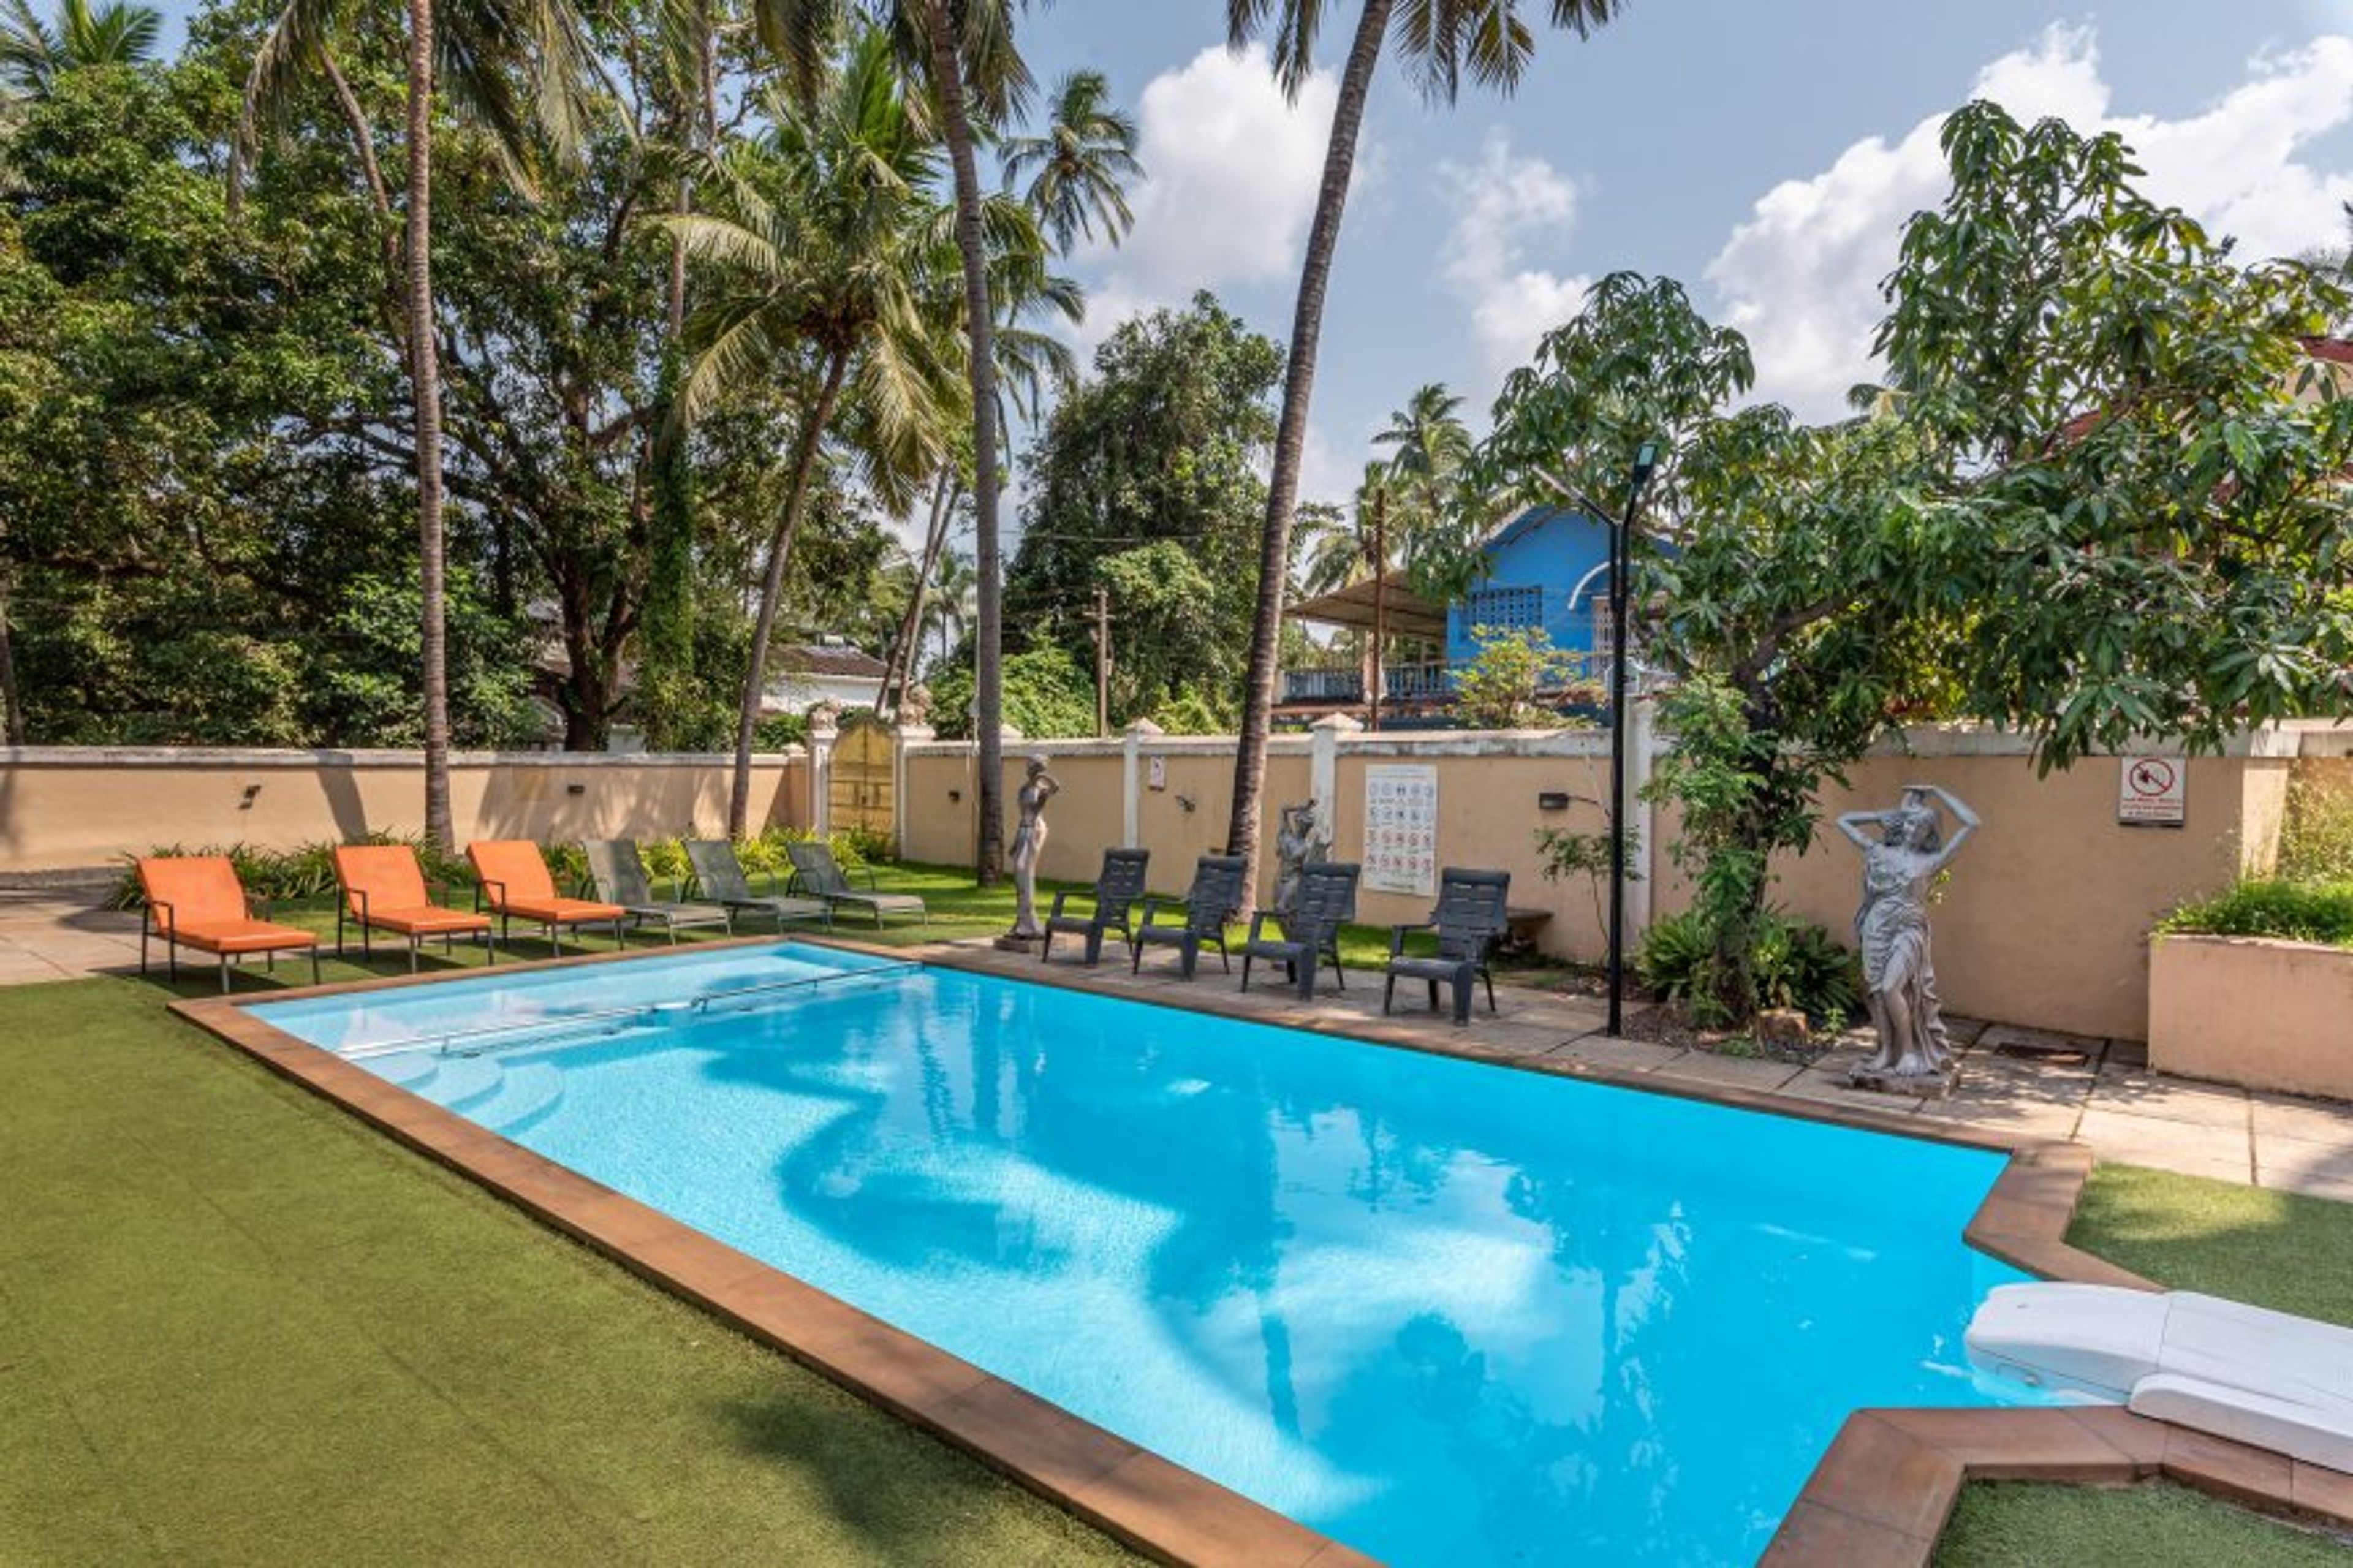 Villa with a pool for rent in Calangute